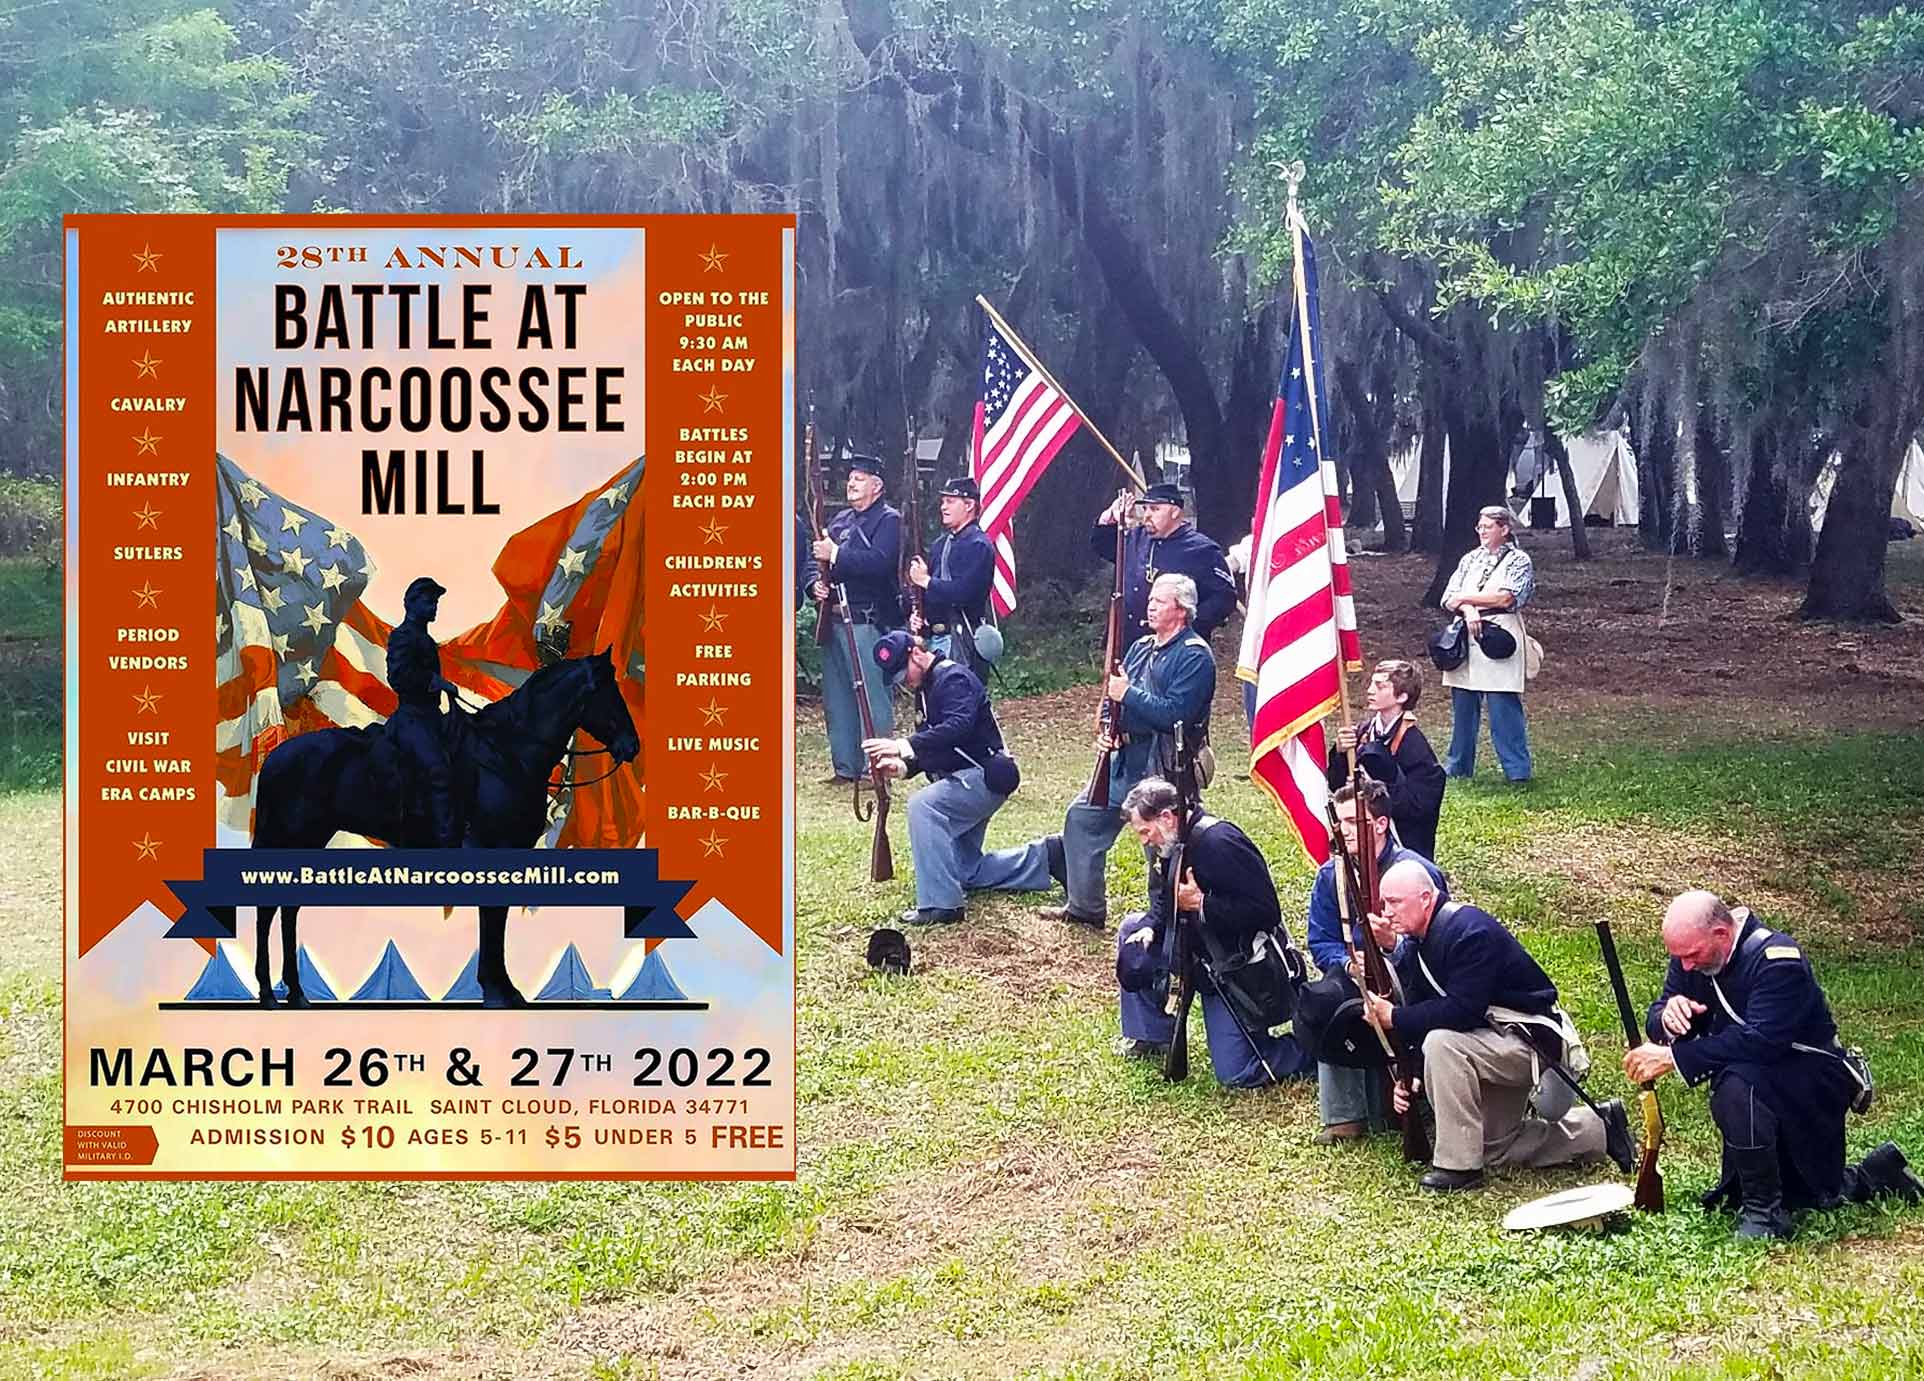 Battle at Narcoossee Mill Returns to St. Cloud's Chisolm Park March 2627